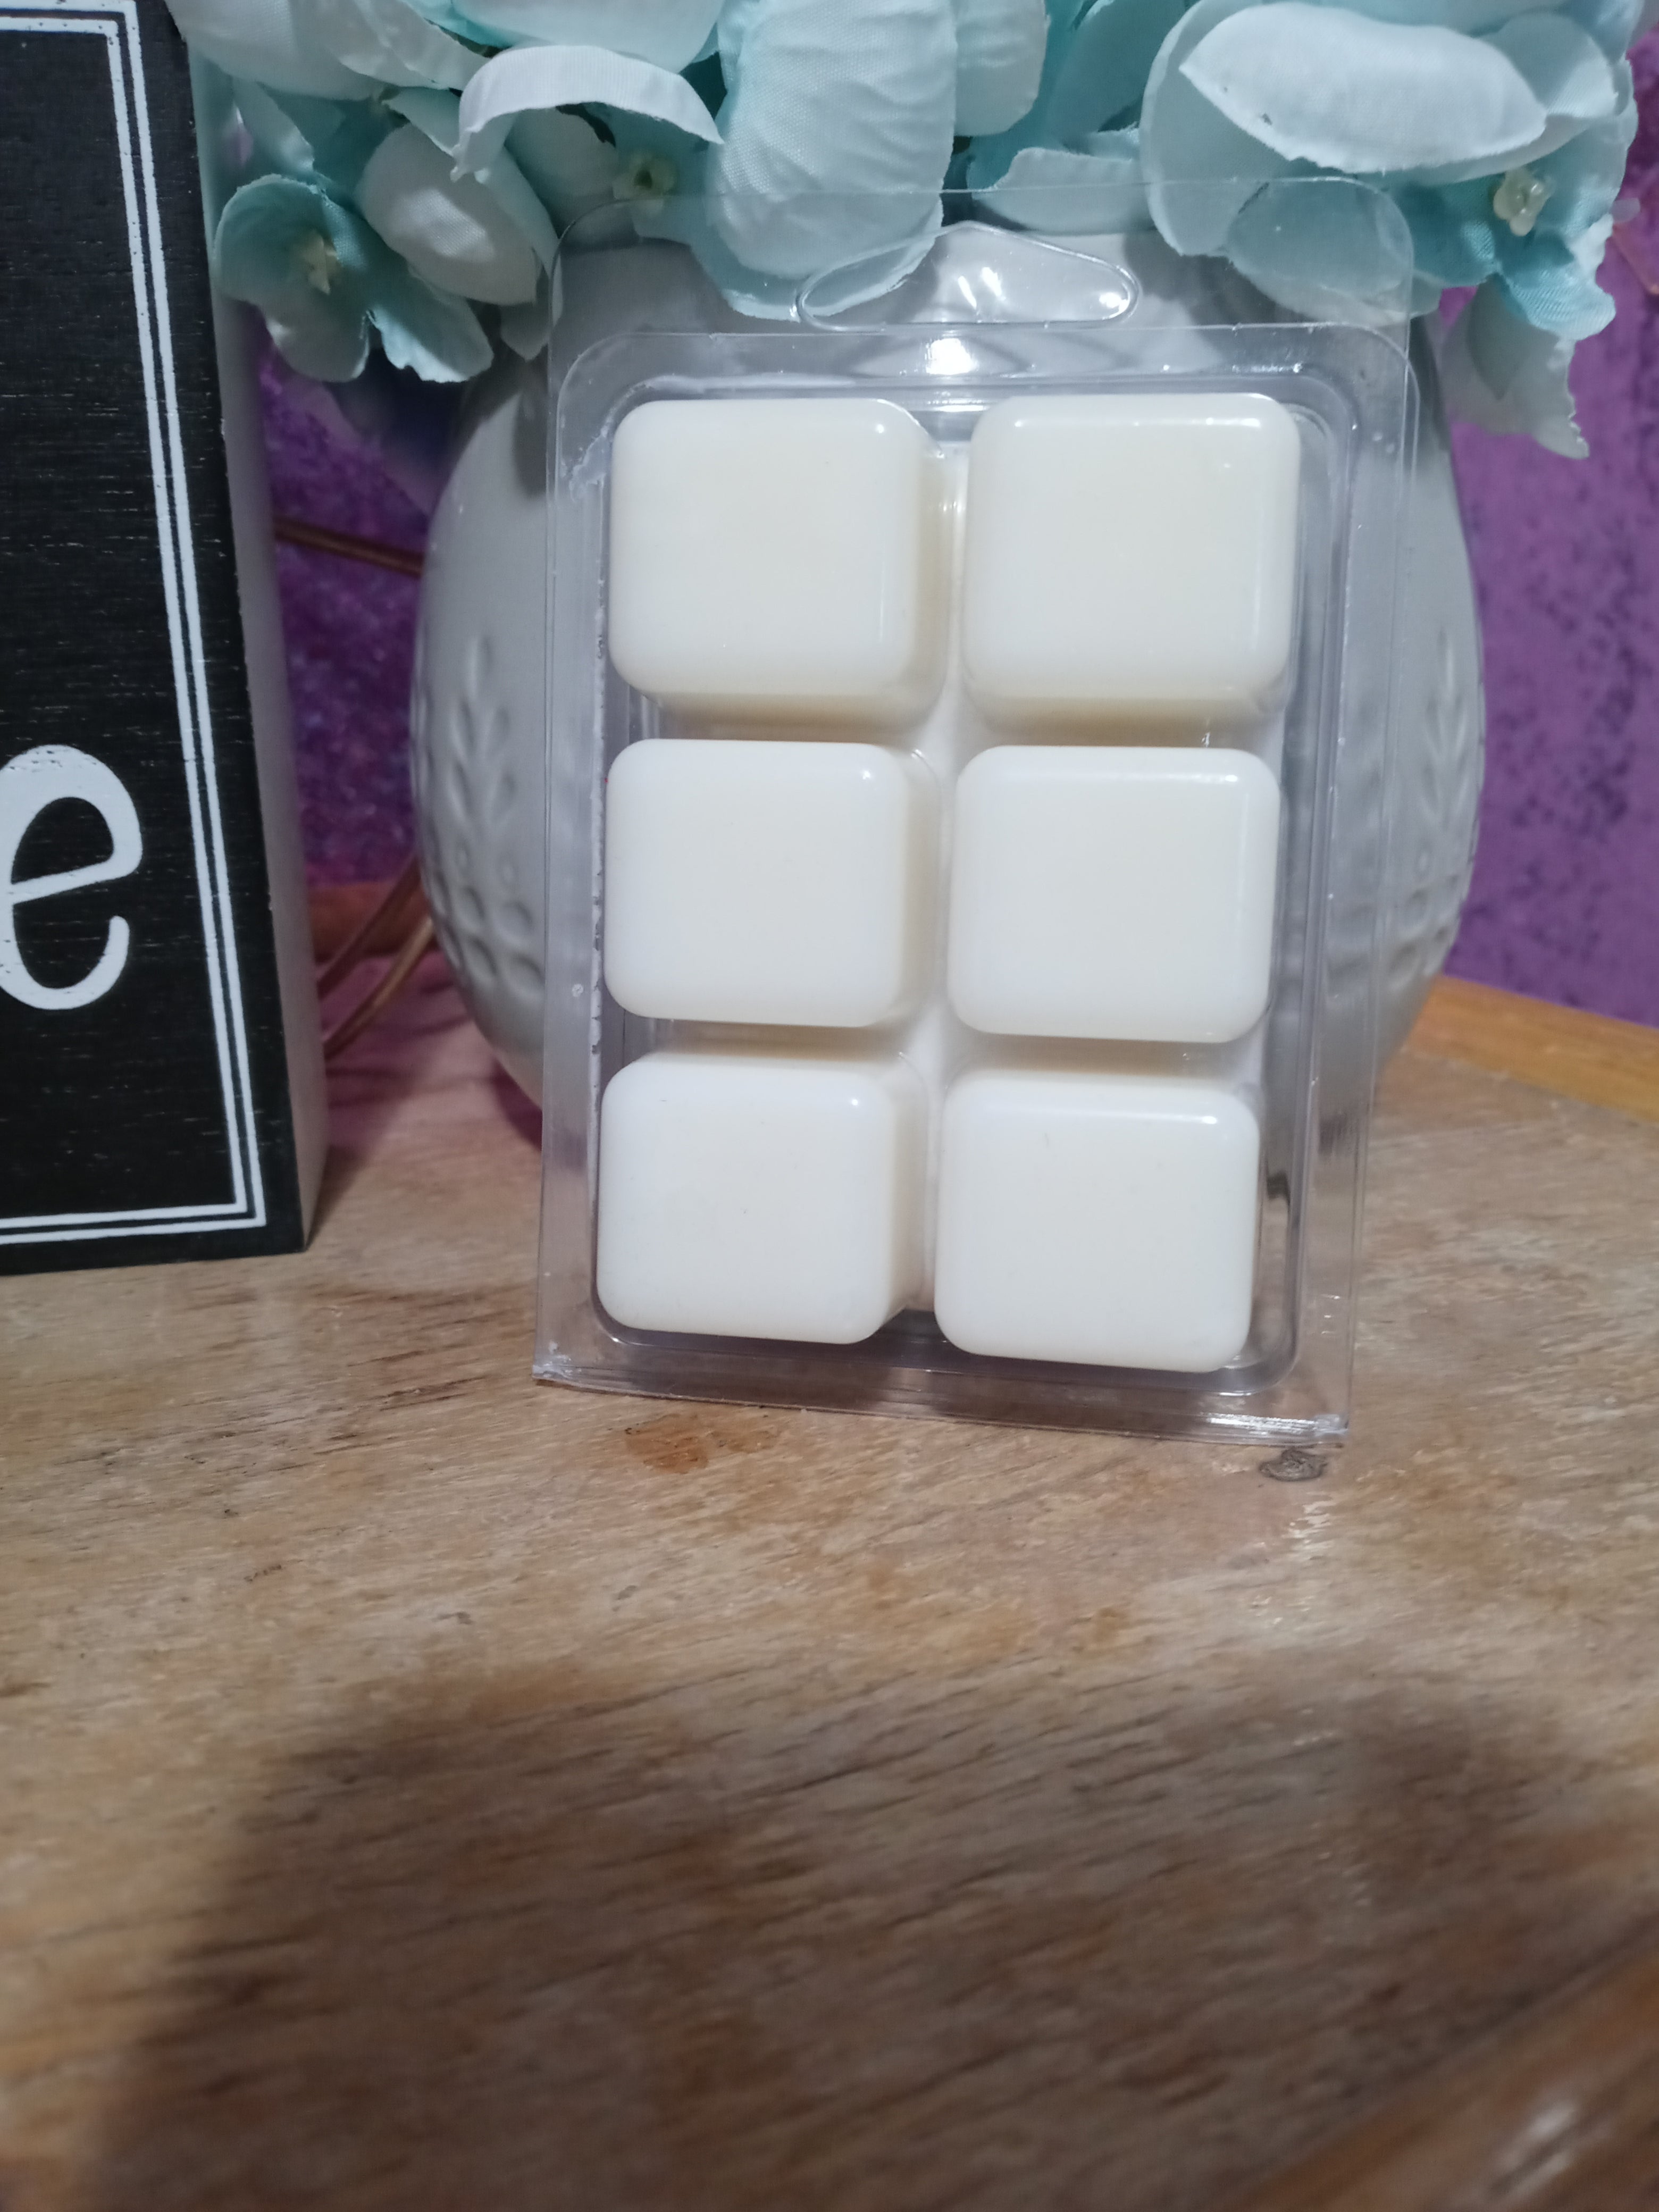 Country bath House wax melts